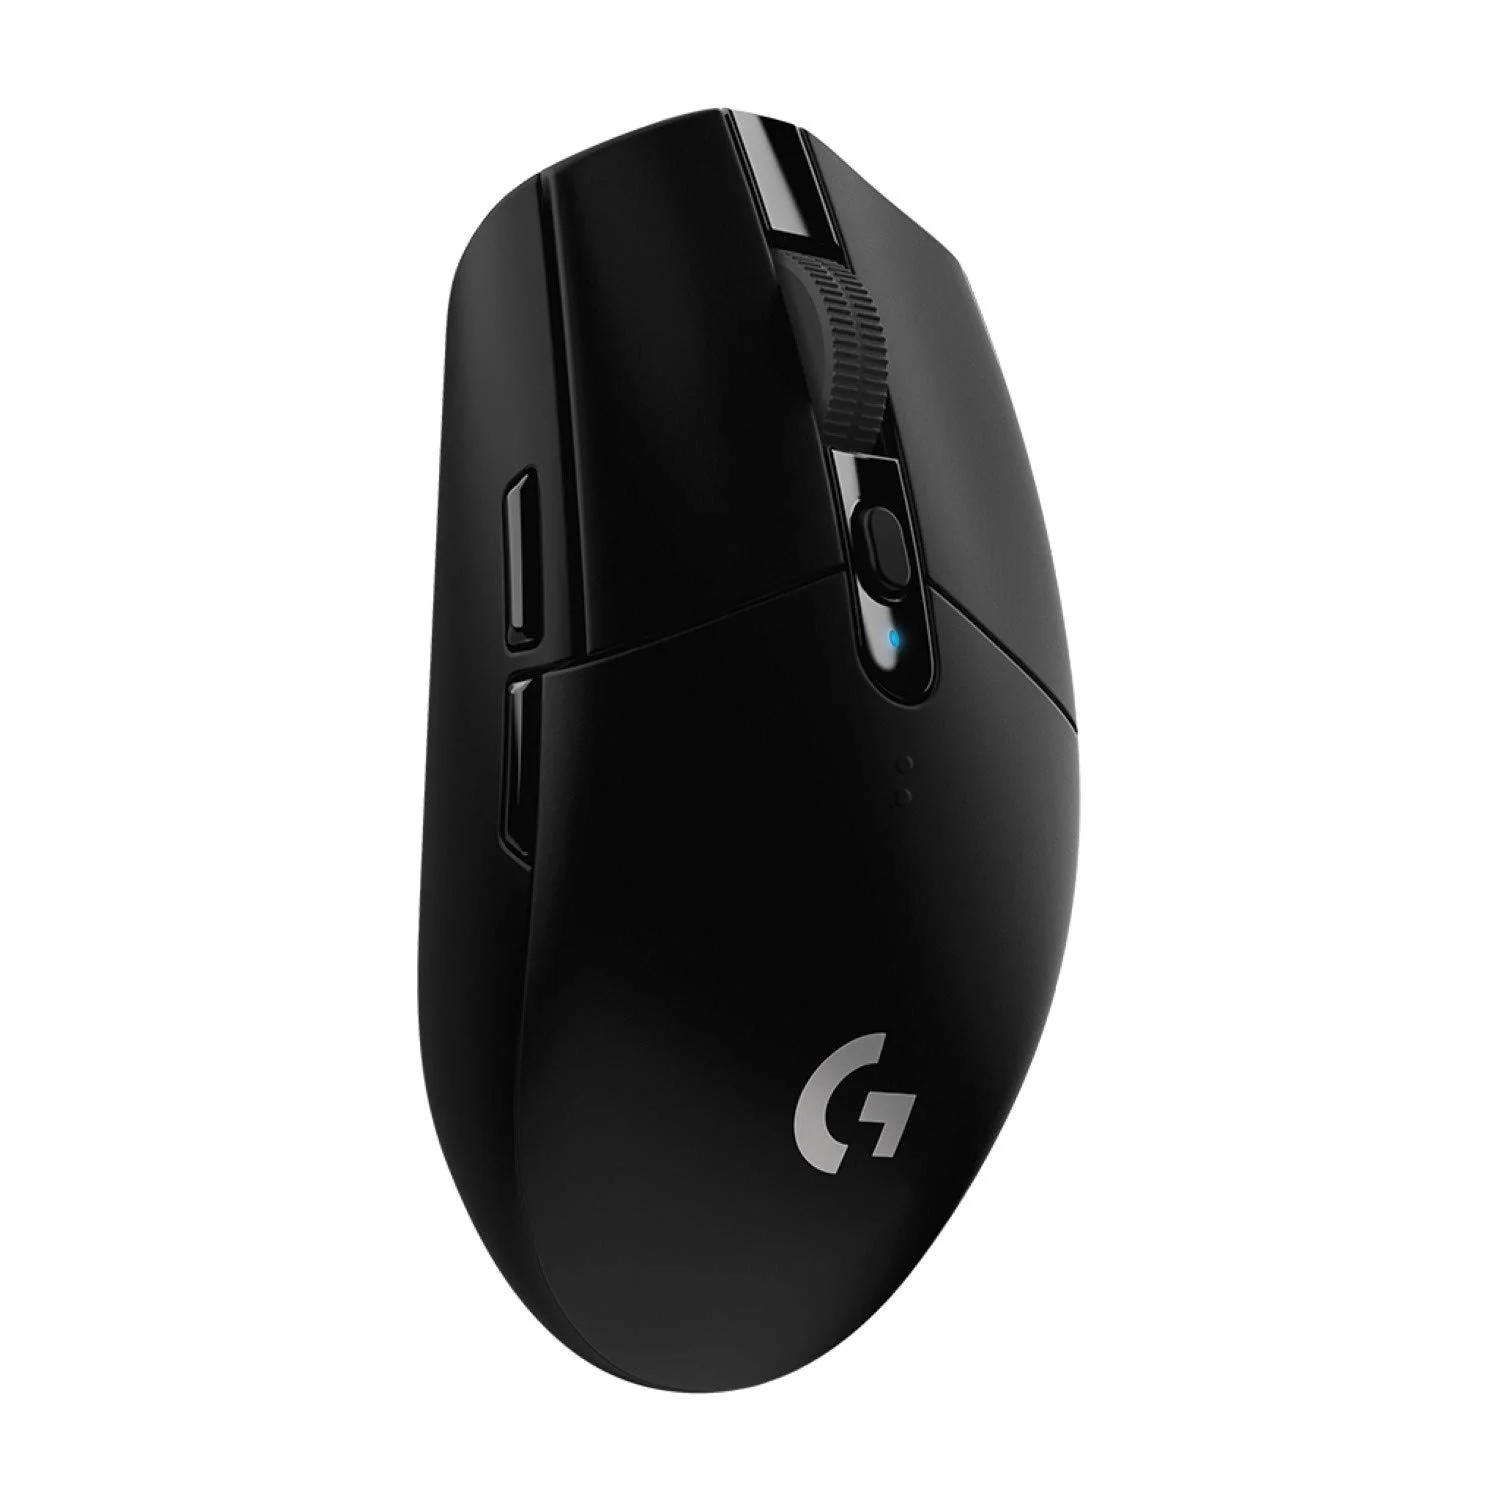 BEST WIRELESS GAMING MOUSE